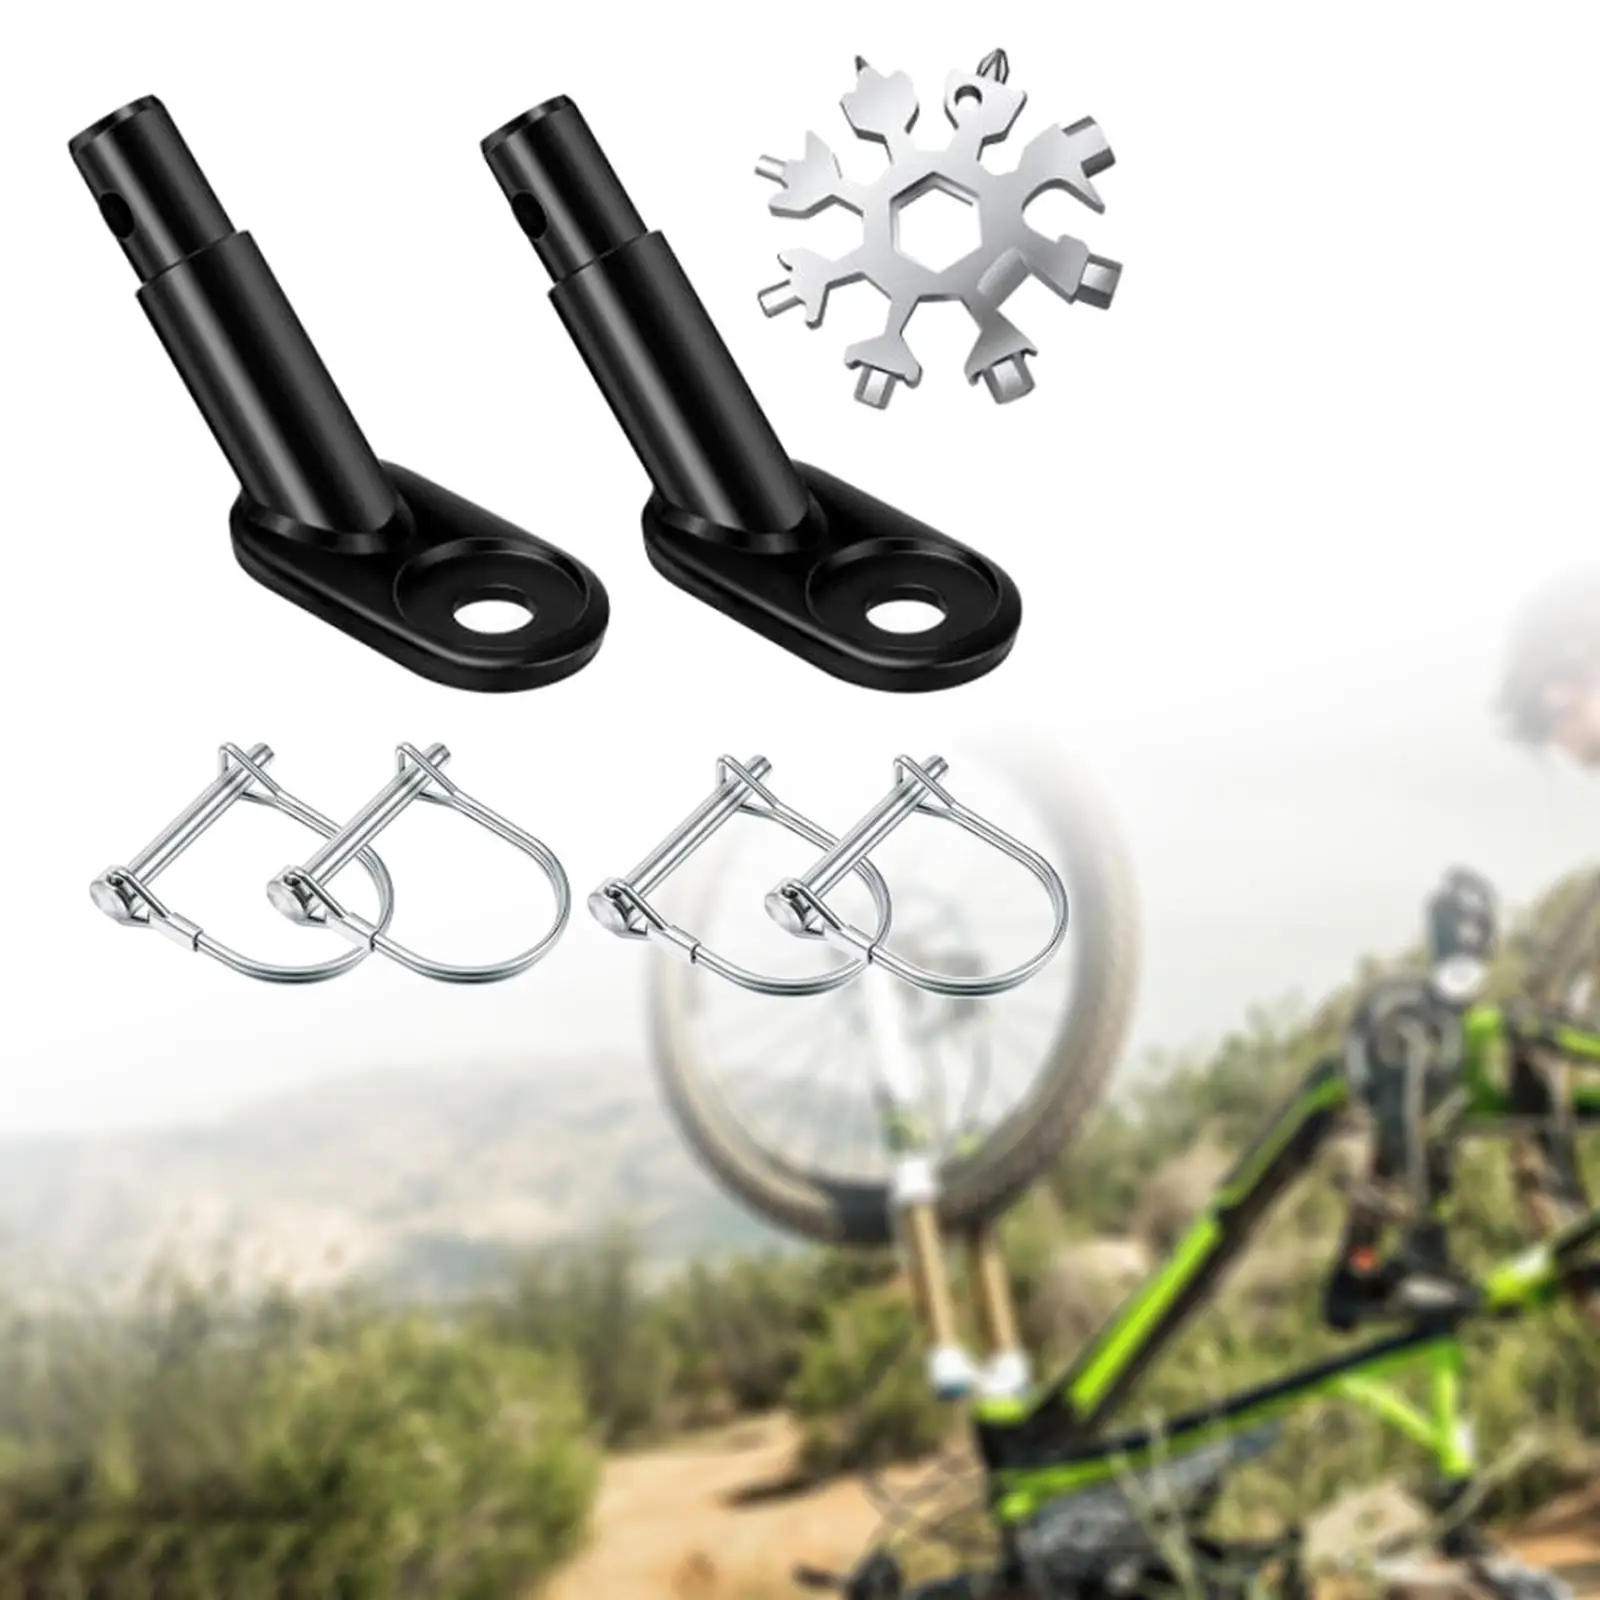 Universal Bike Trailer Hitch Attachment Connector Kit -Left Cycling Replacement